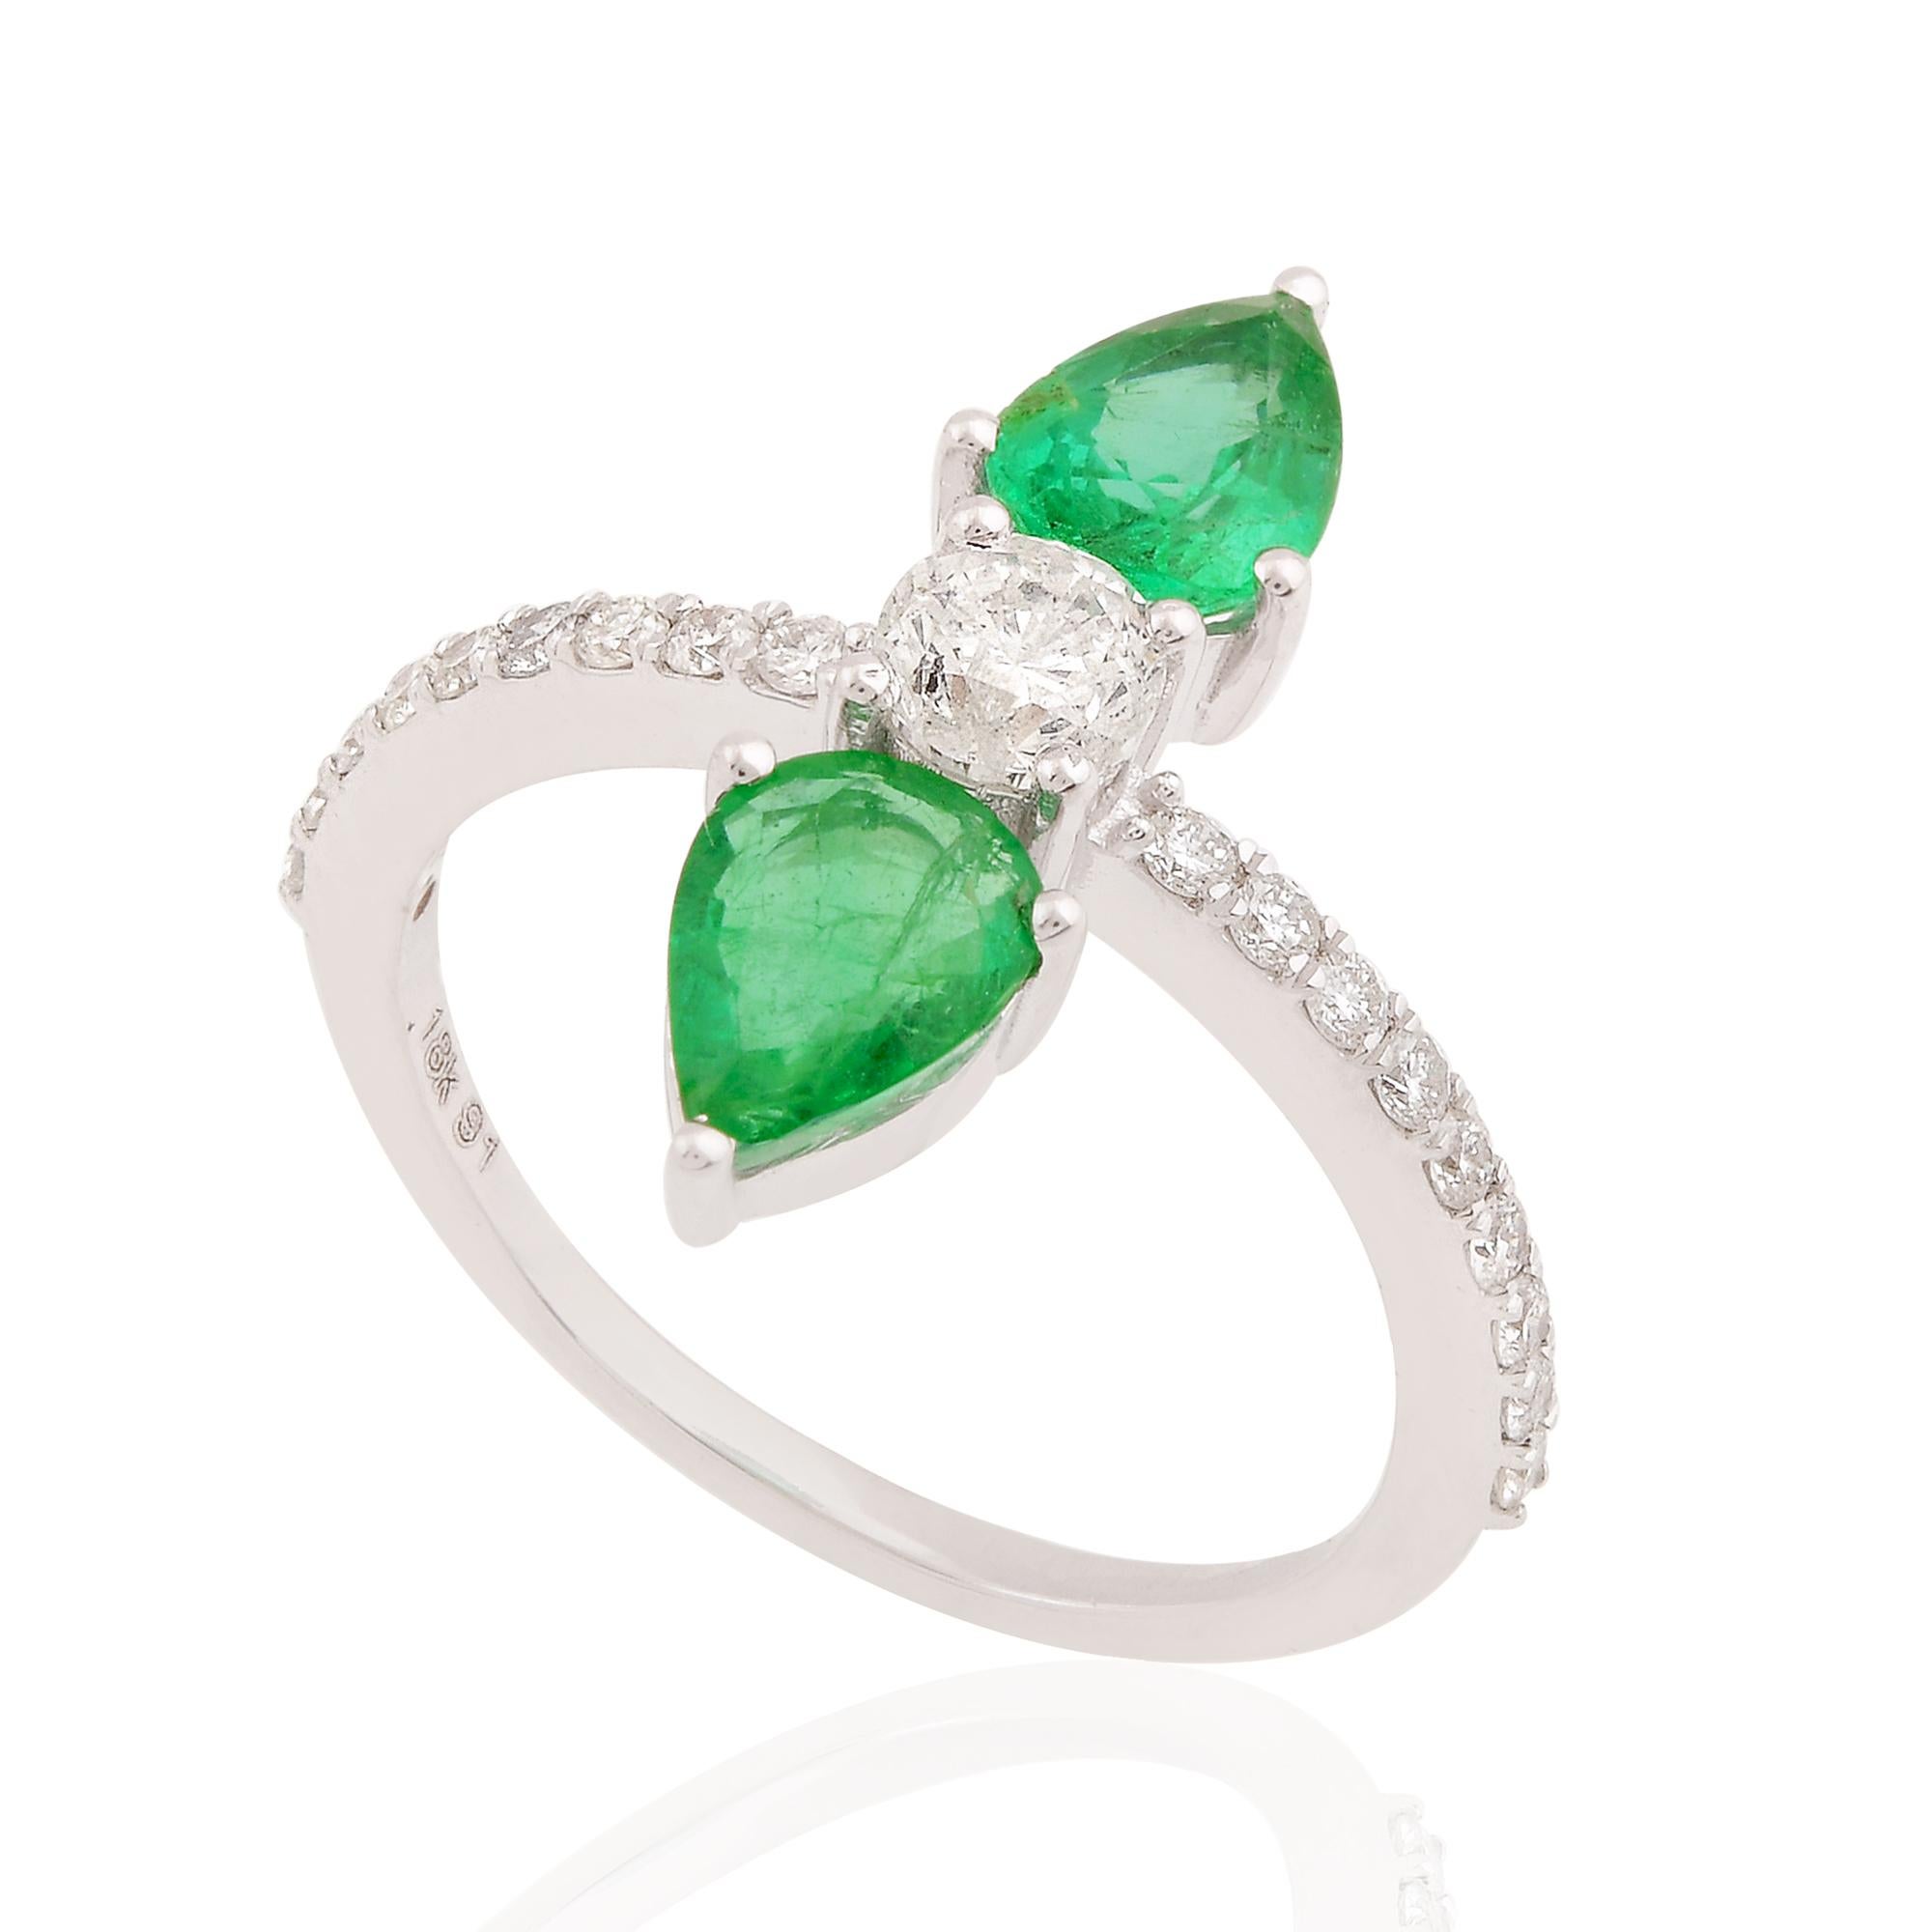 For Sale:  Pear Natural Emerald Gemstone Band Ring Diamond Solid 18k White Gold Jewelry 3